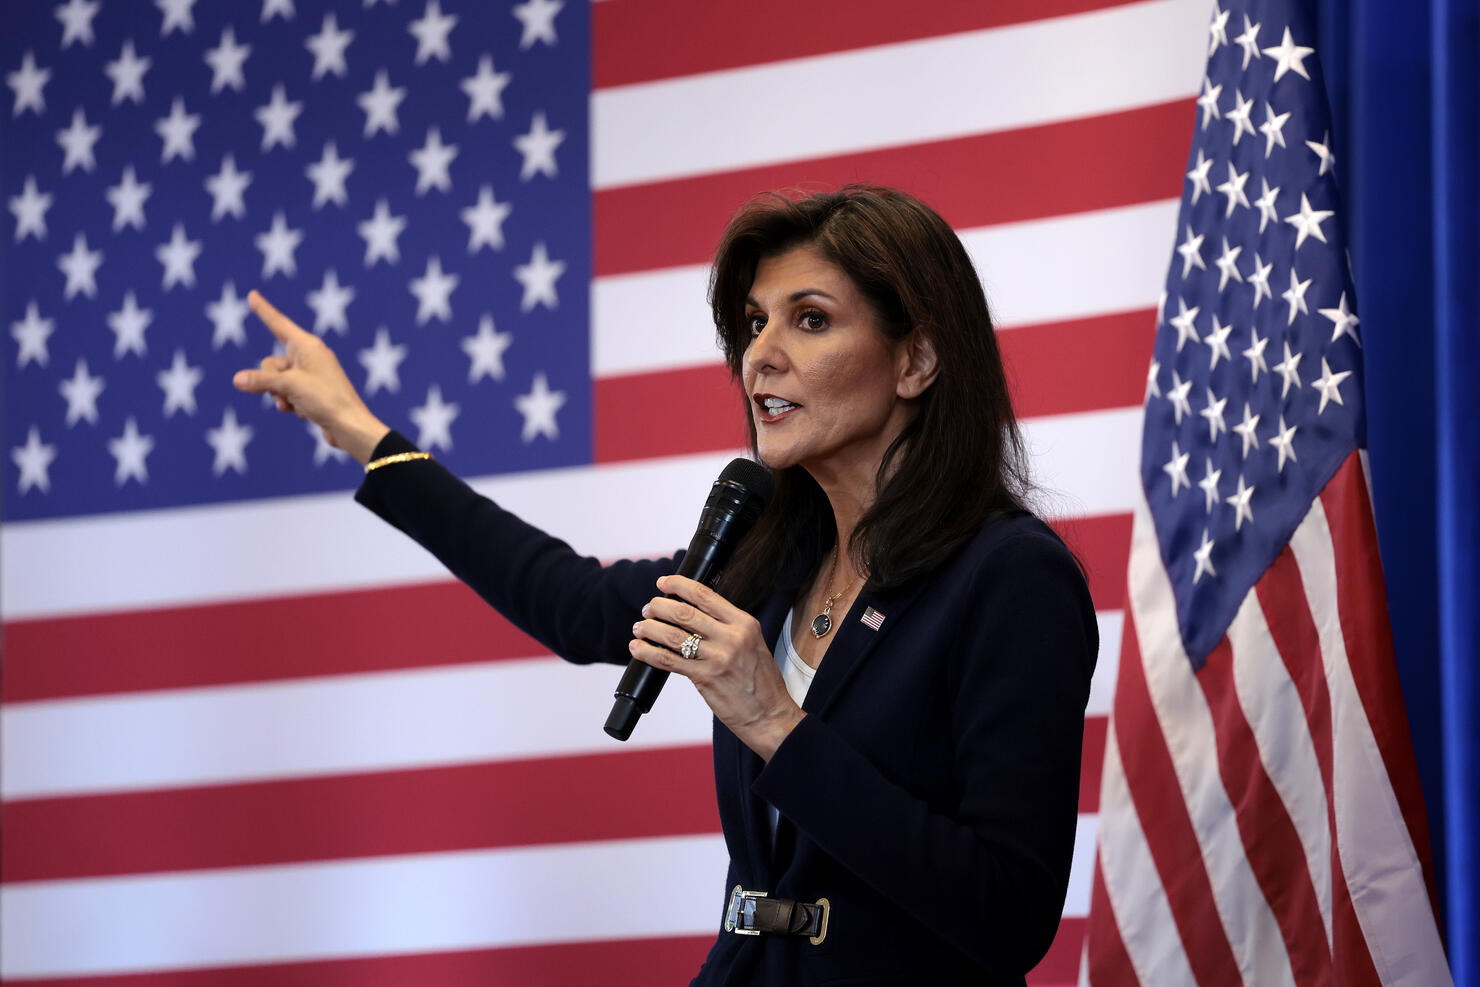 Nikki Haley Campaigns For President Throughout Her Home State Of South Carolina